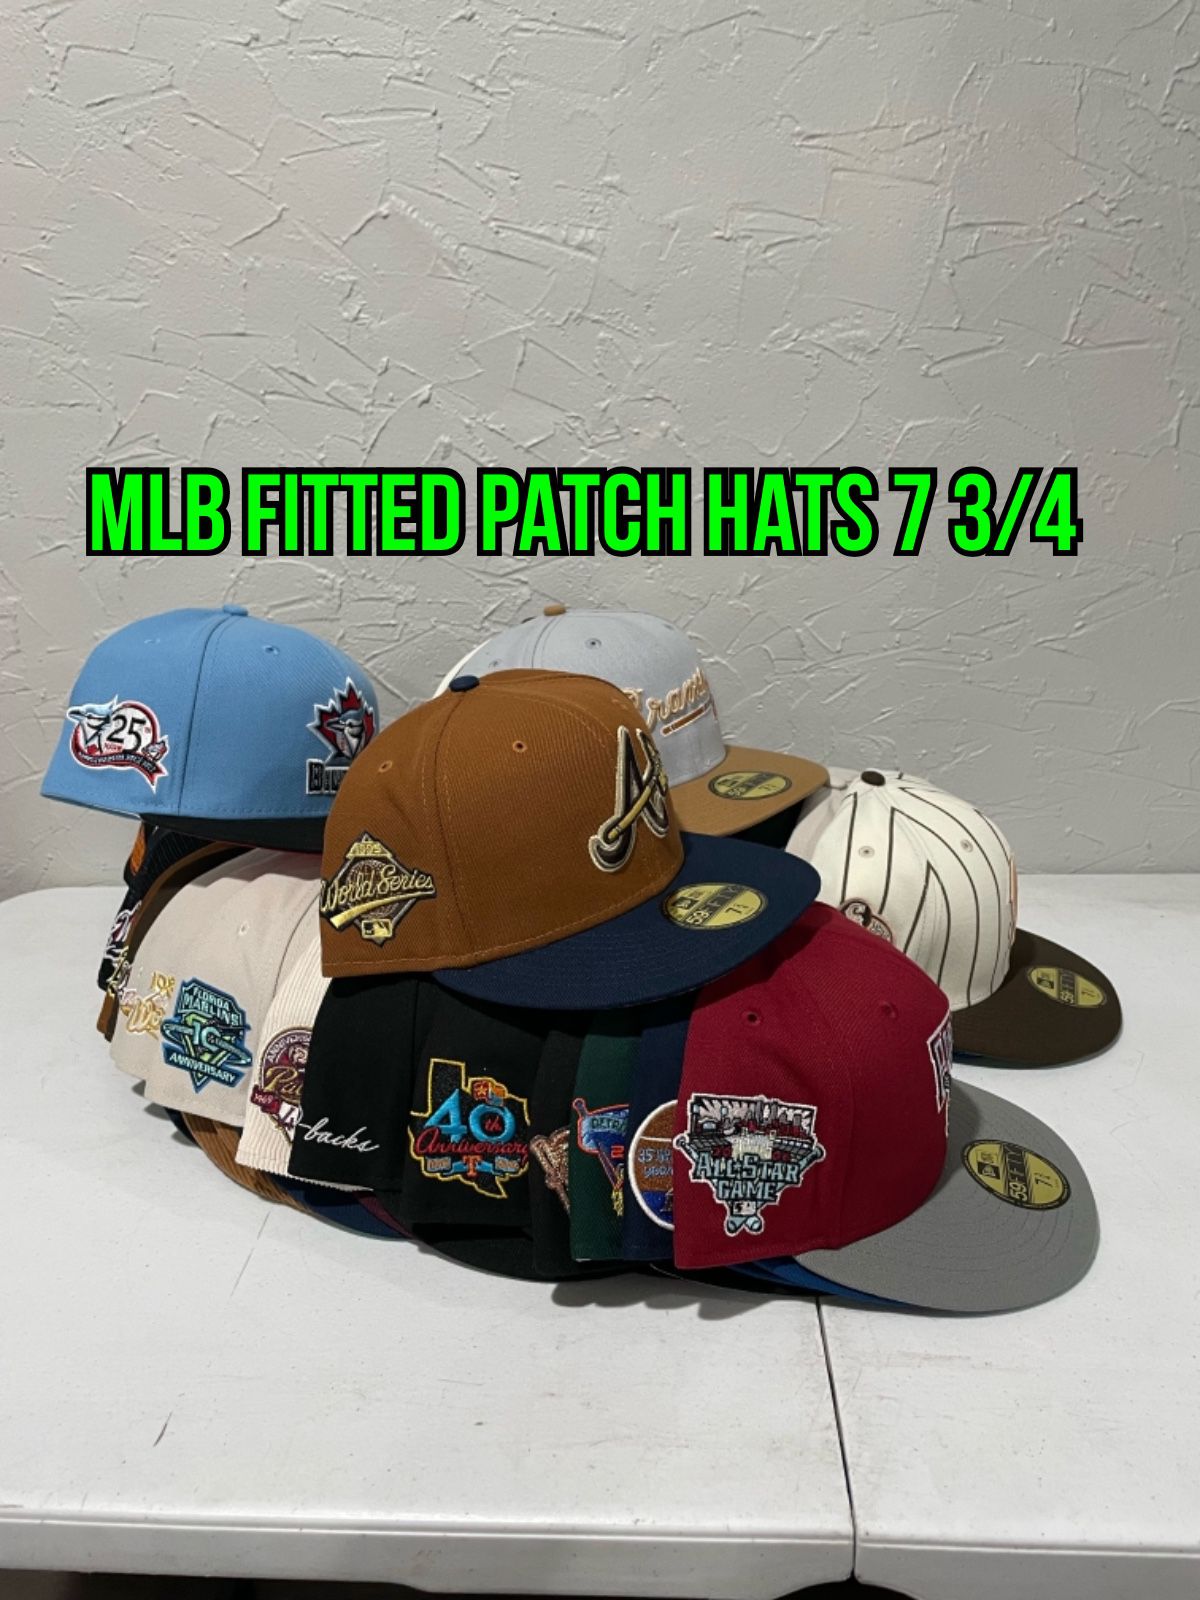 MLB New Era Patch UV 59fifty Fitted Hats Size 7 3/4 Many Teams